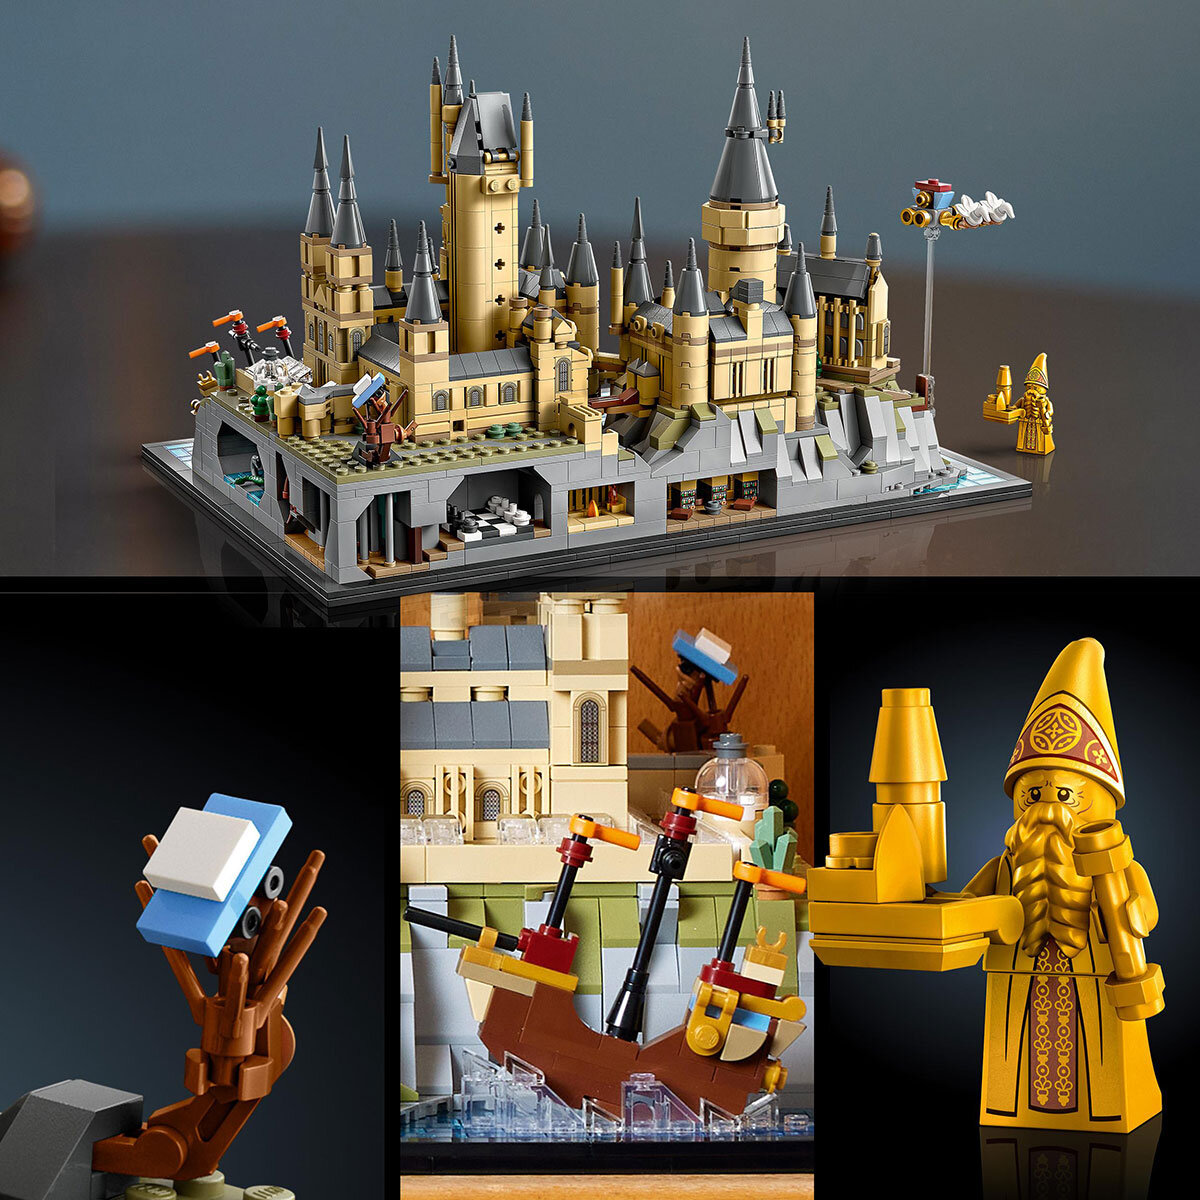 Buy LEGO Harry Potter Castle Feature Image at Costco.co.uk